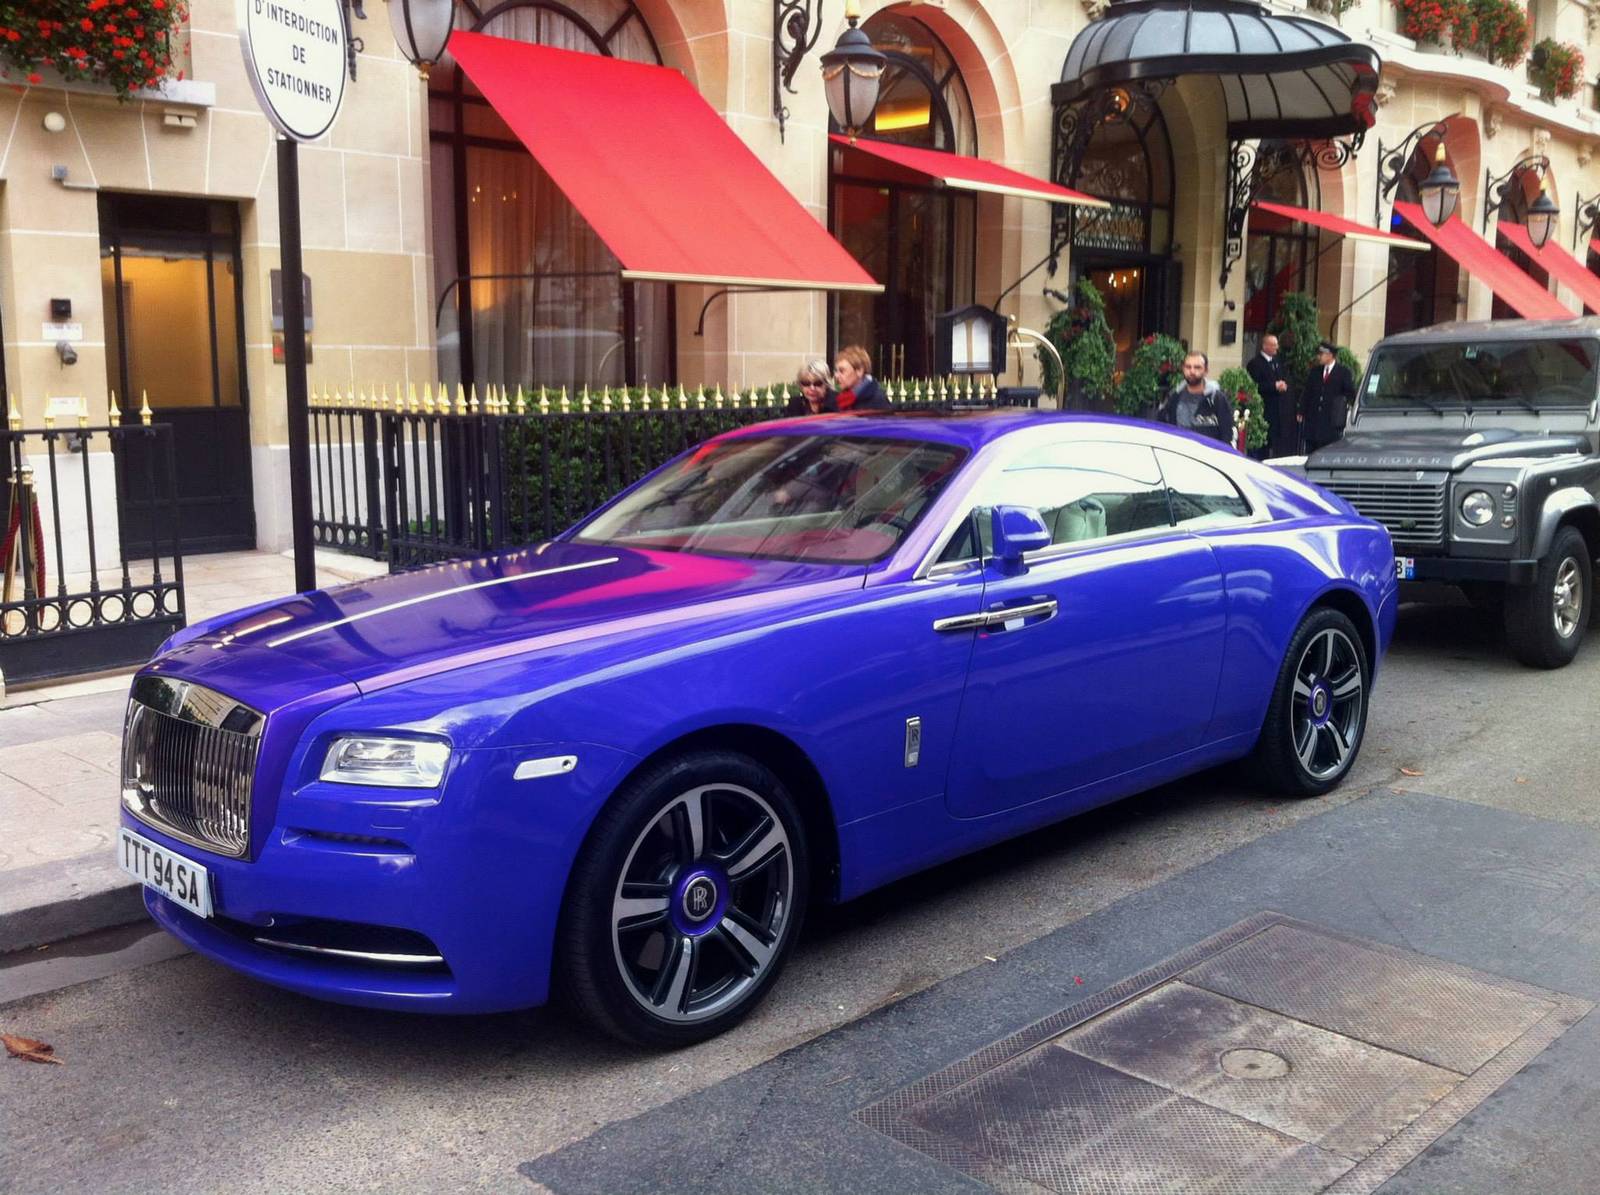 Purple Rolls-Royce Wraith Spotted in Paris